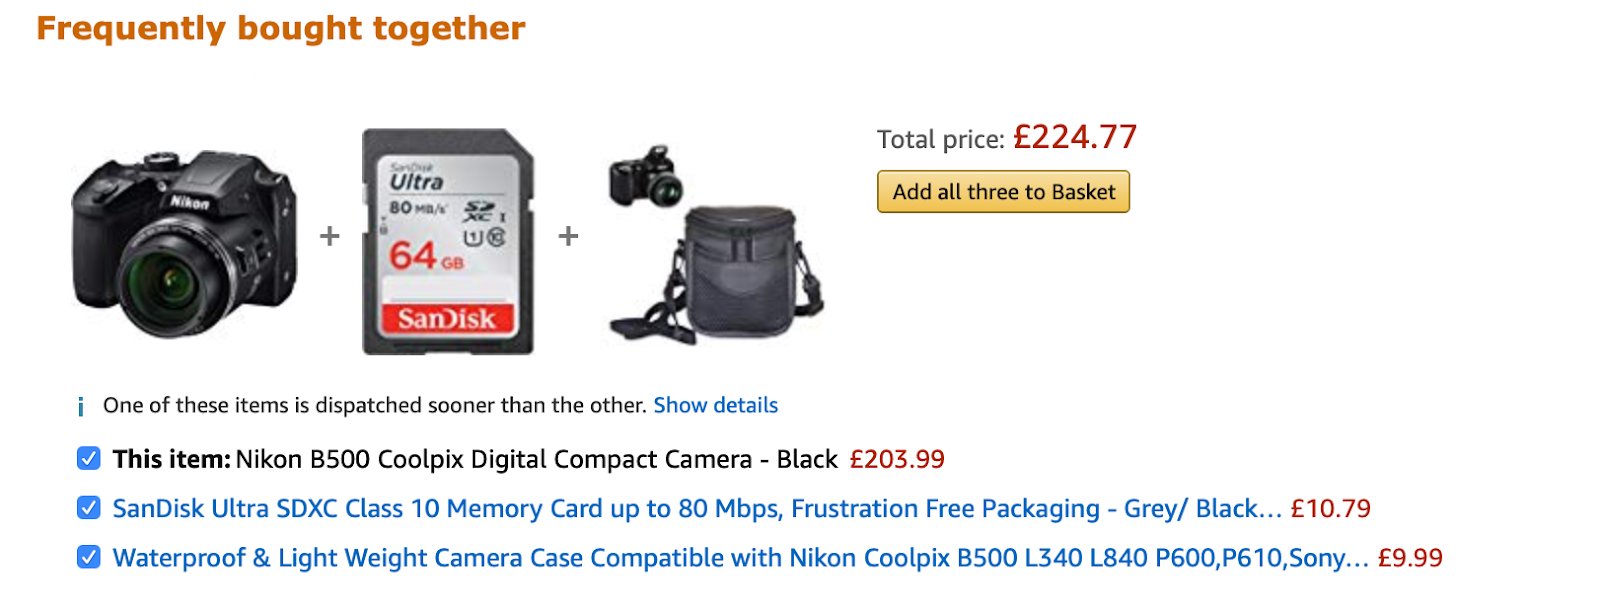 Example Of Cross Selling On Amazon Product Page